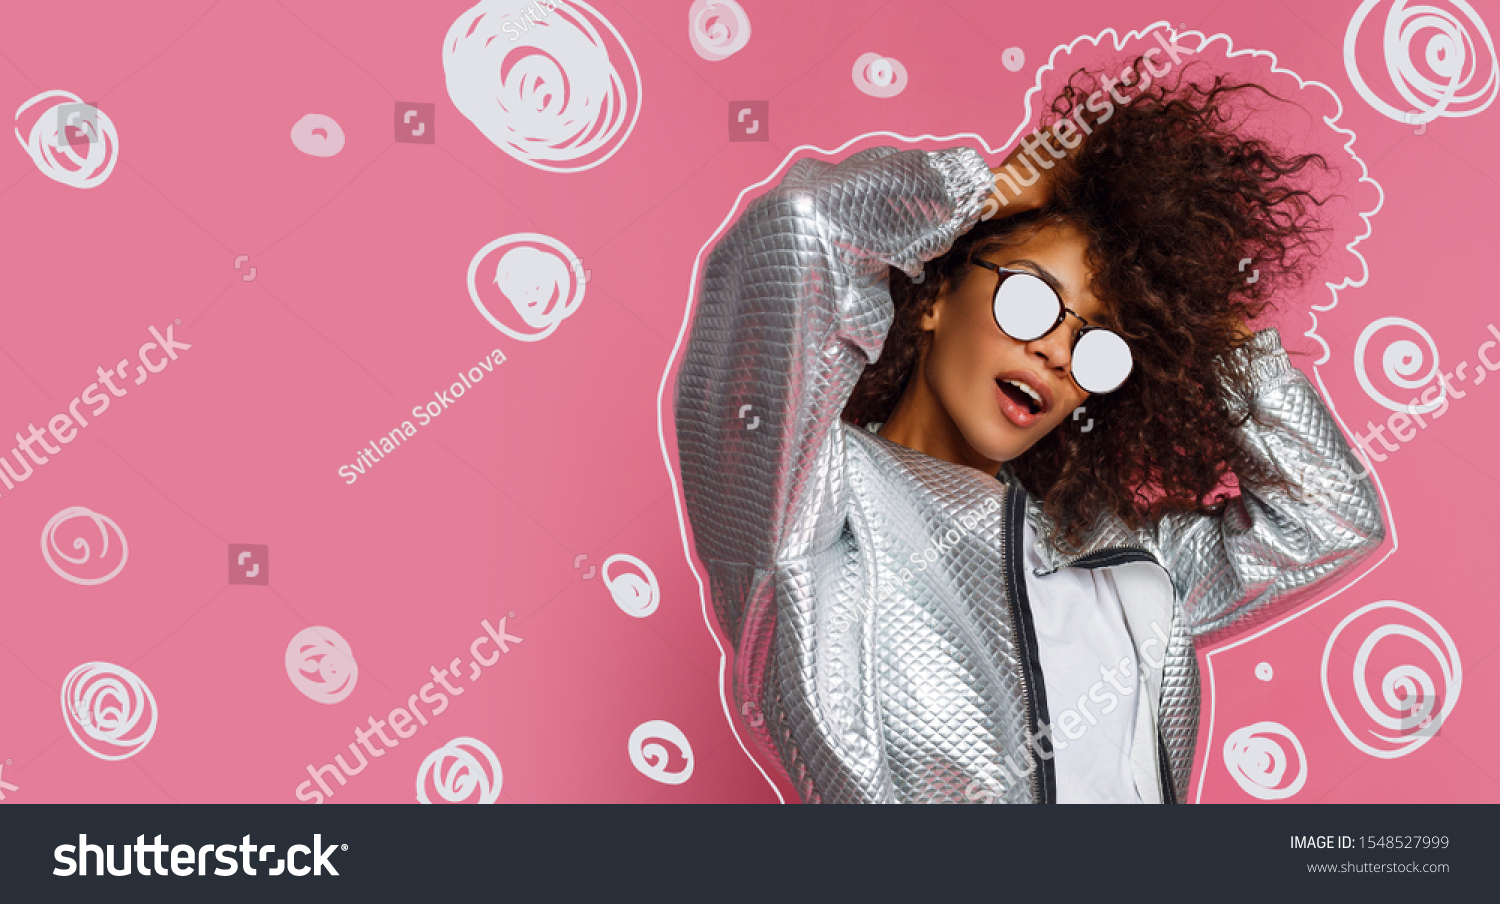 Stylish playful girl  dancing and playing with curly hairs on pink background. Party mood.  #1548527999